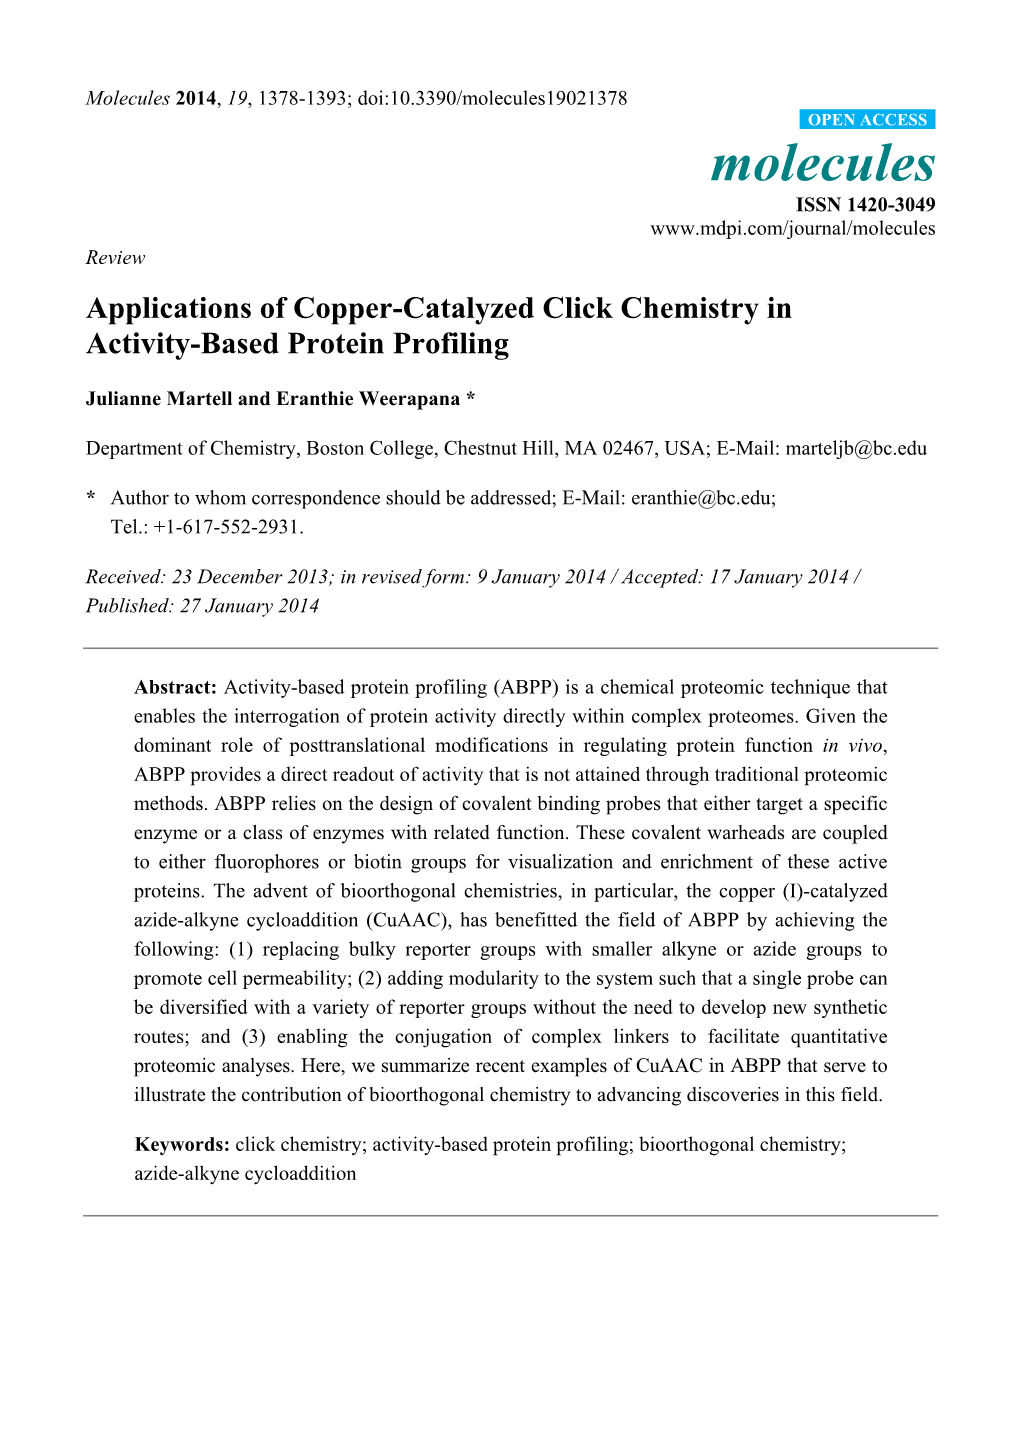 Applications of Copper-Catalyzed Click Chemistry in Activity-Based Protein Profiling